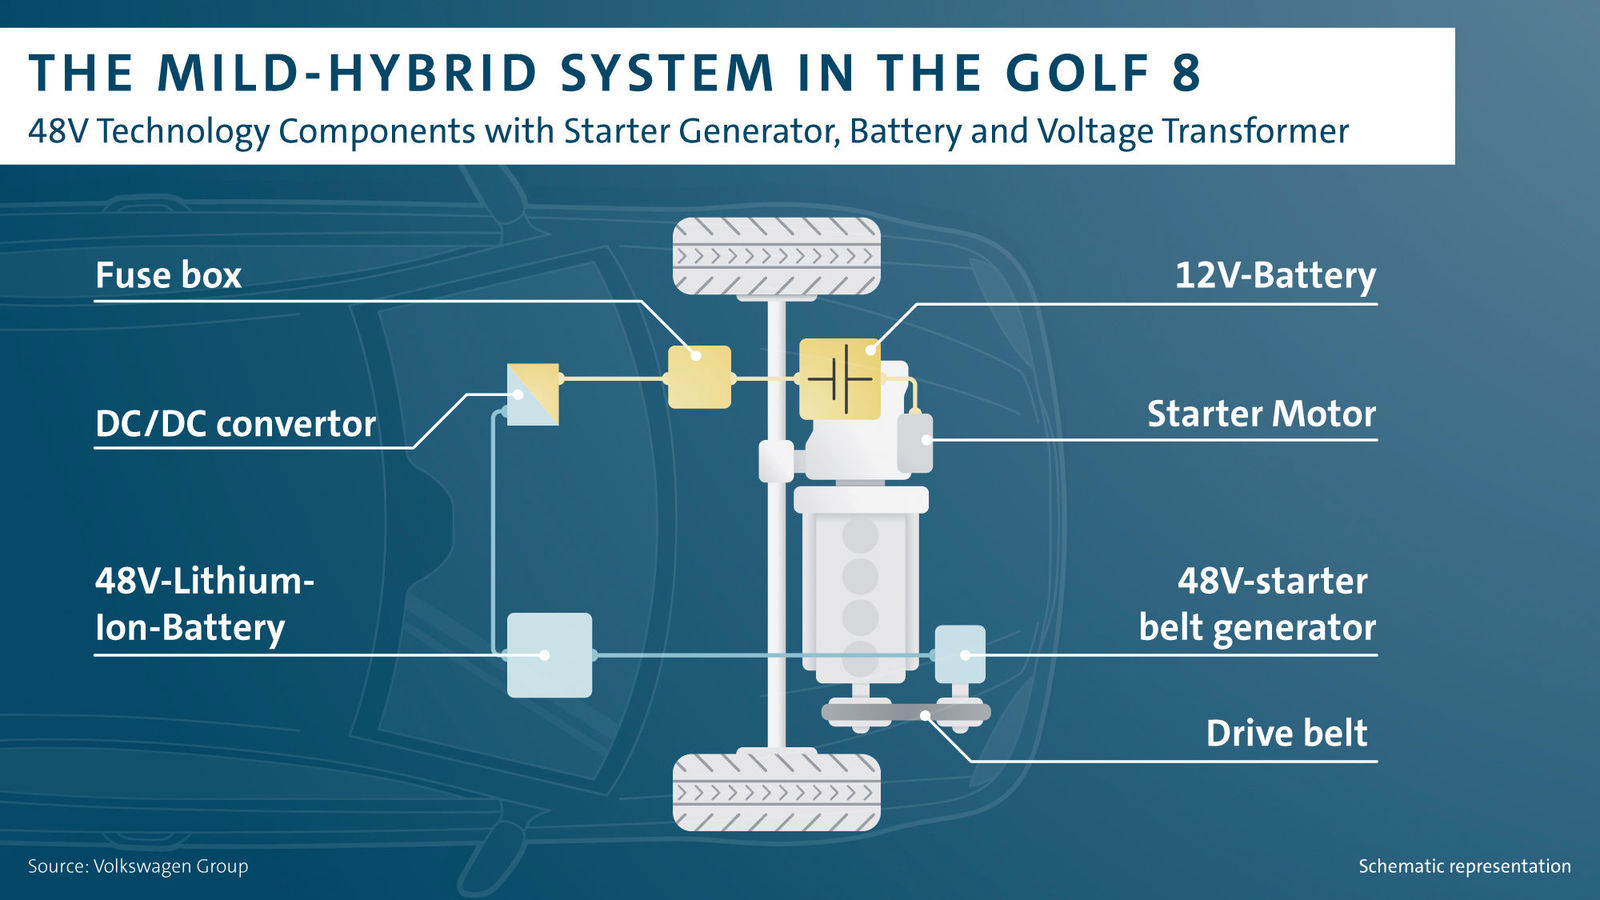 The new Golf: with 48V technology